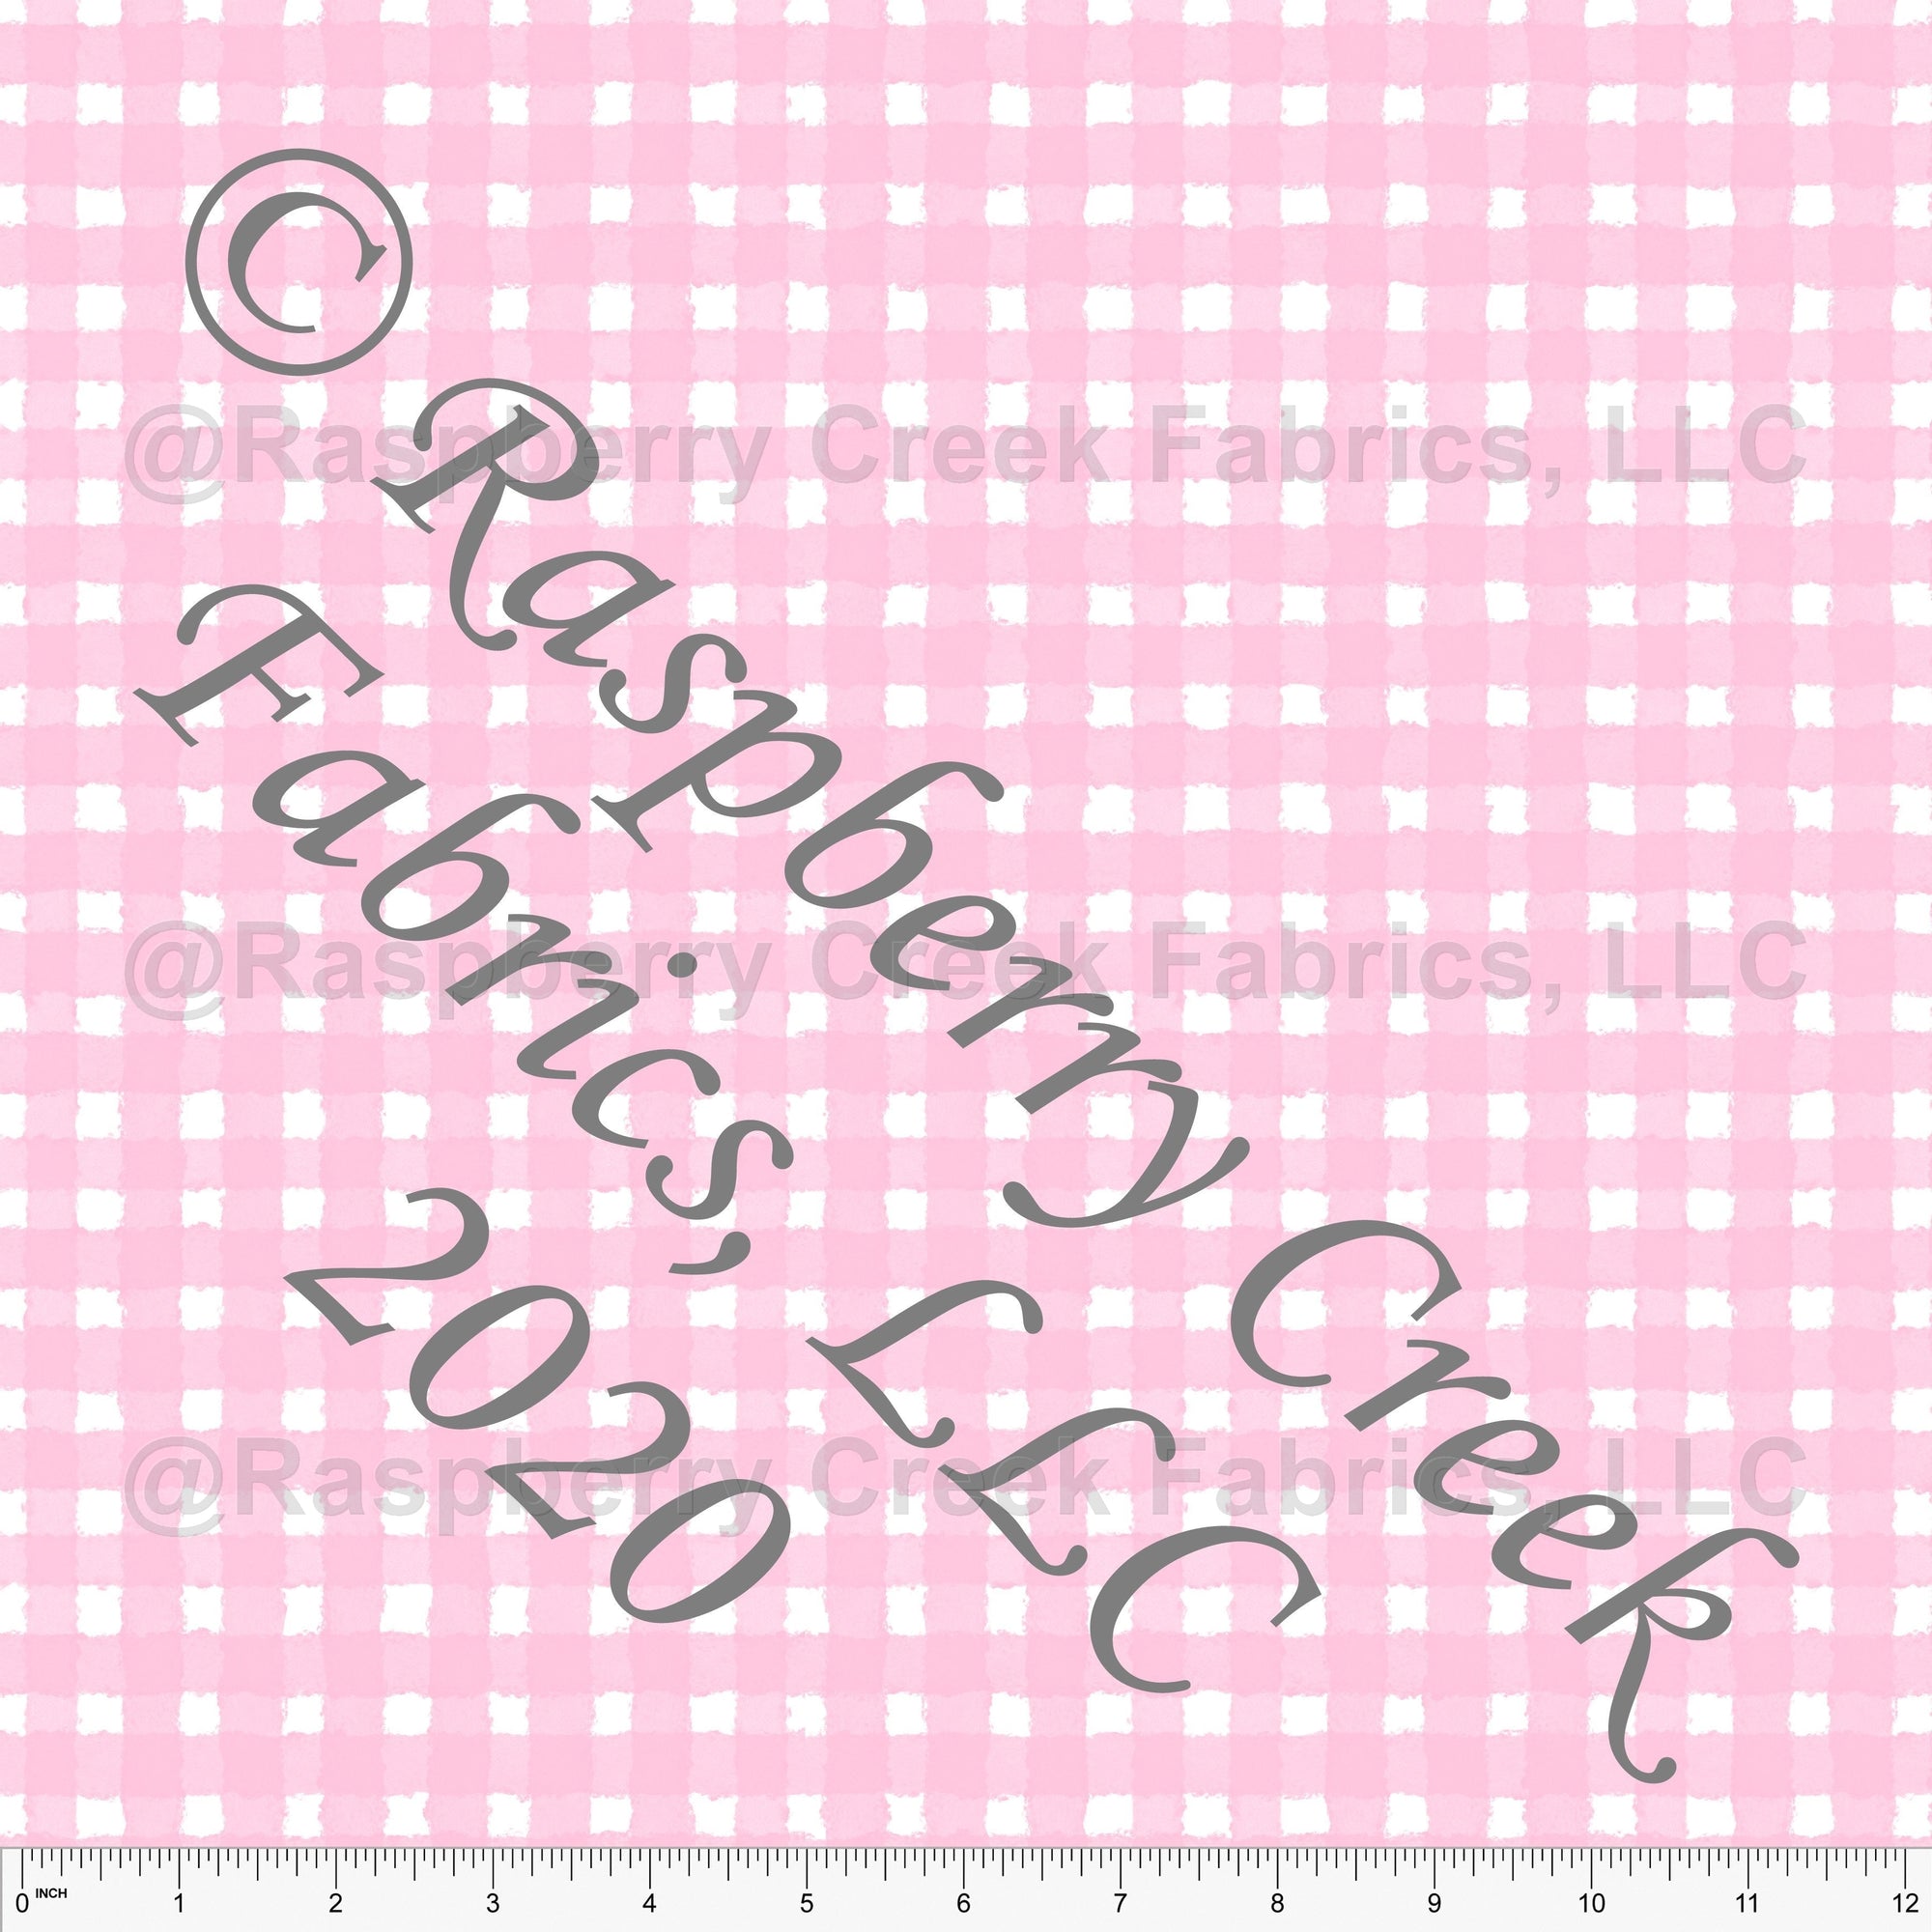 Pink and White Painted Check Gingham, By Bri Powell for Club Fabrics Fabric, Raspberry Creek Fabrics, watermarked